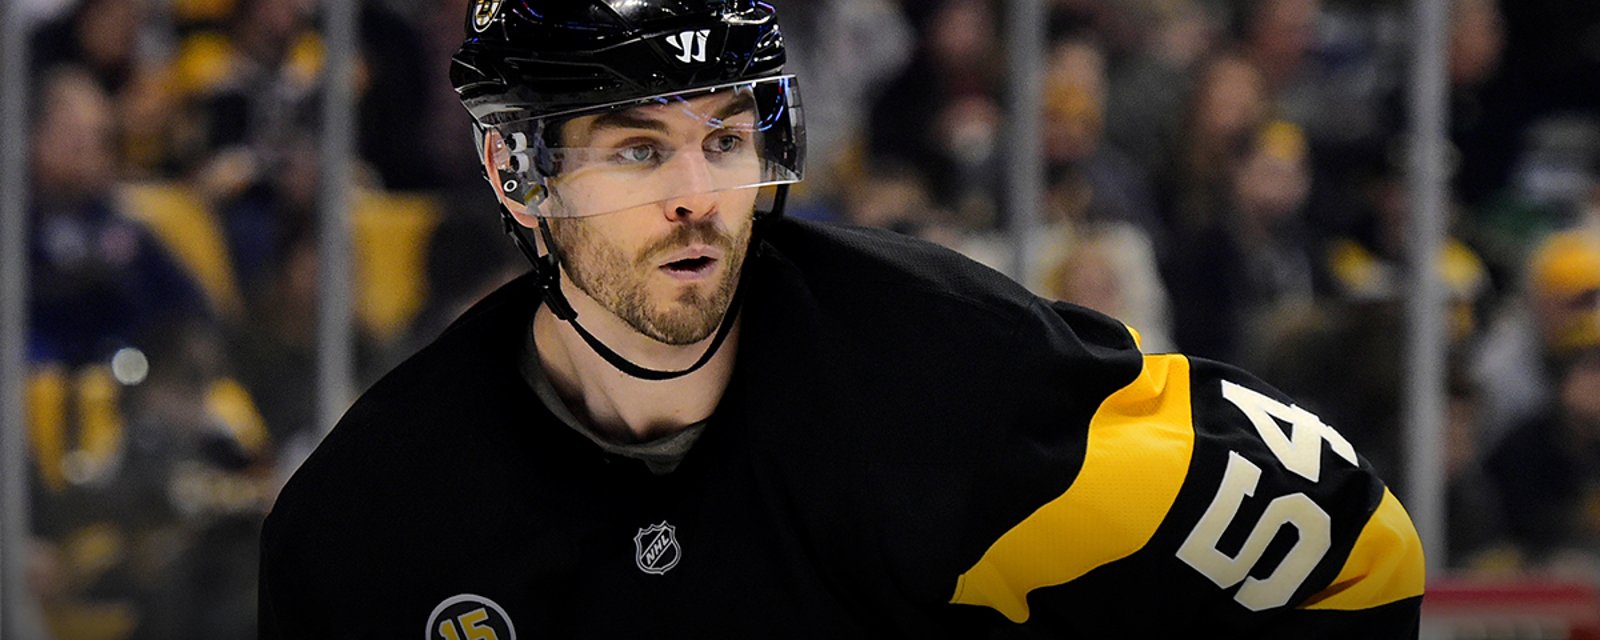 Breaking: McQuaid officially placed on LTIR